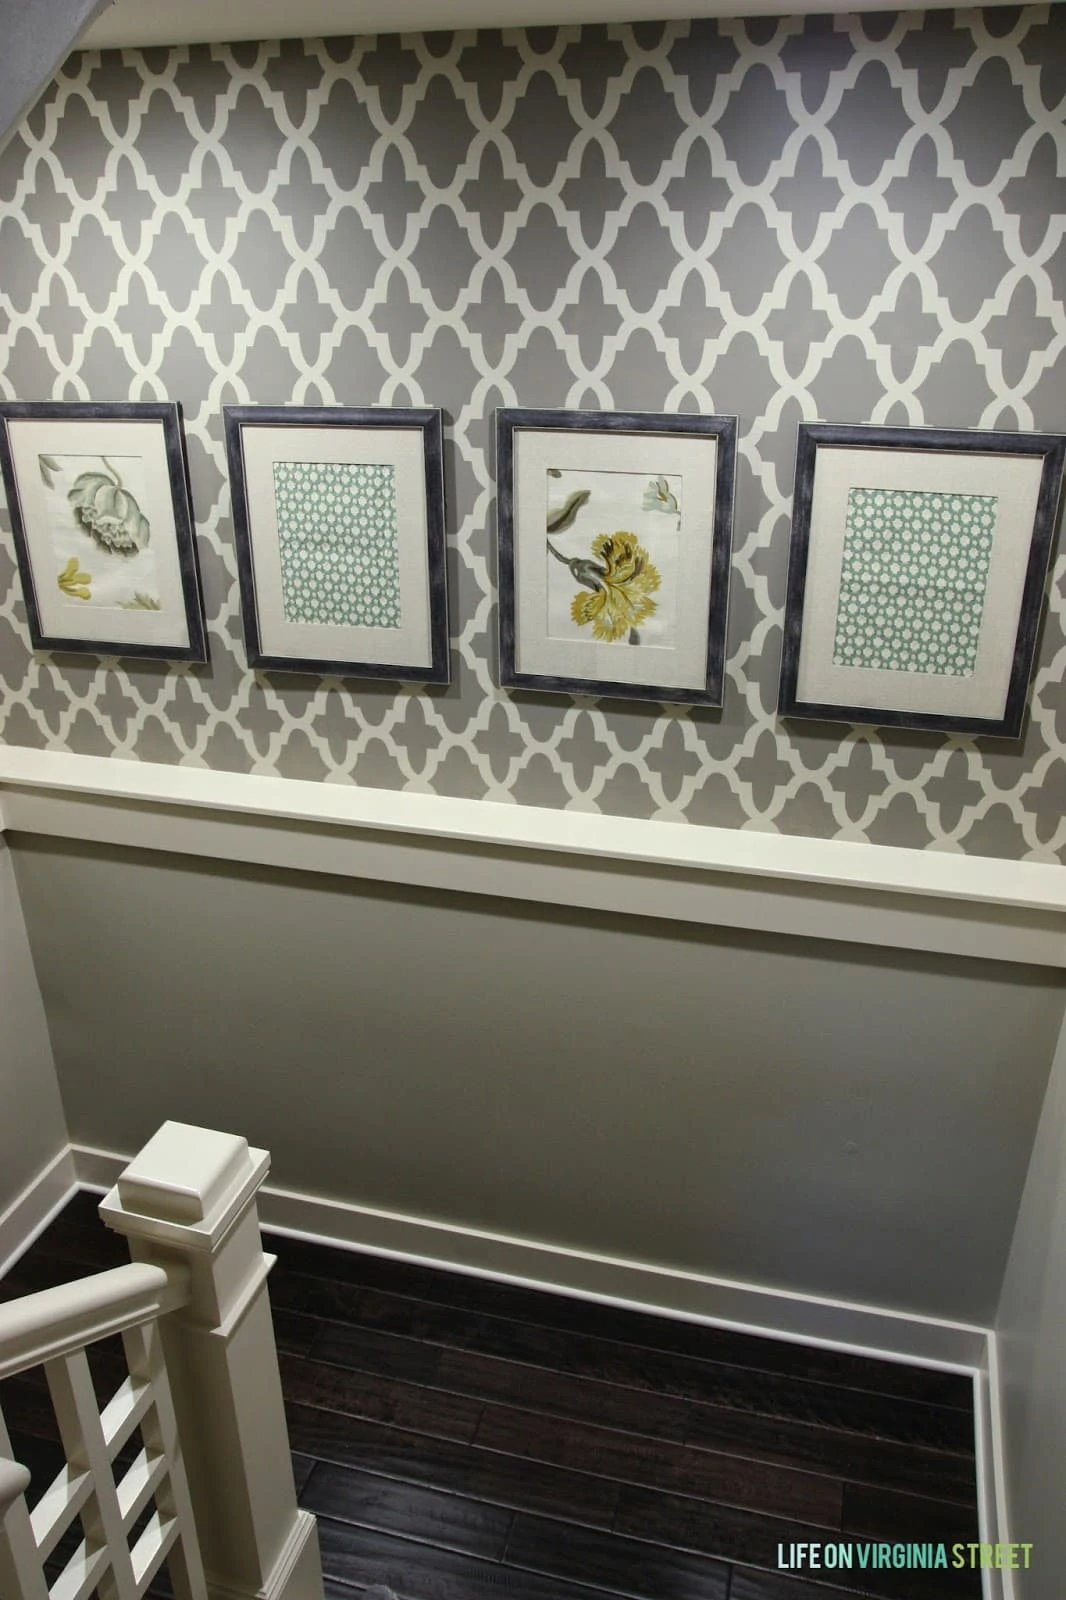 A staircase that has been stencilled with pictures hanging on the wall.